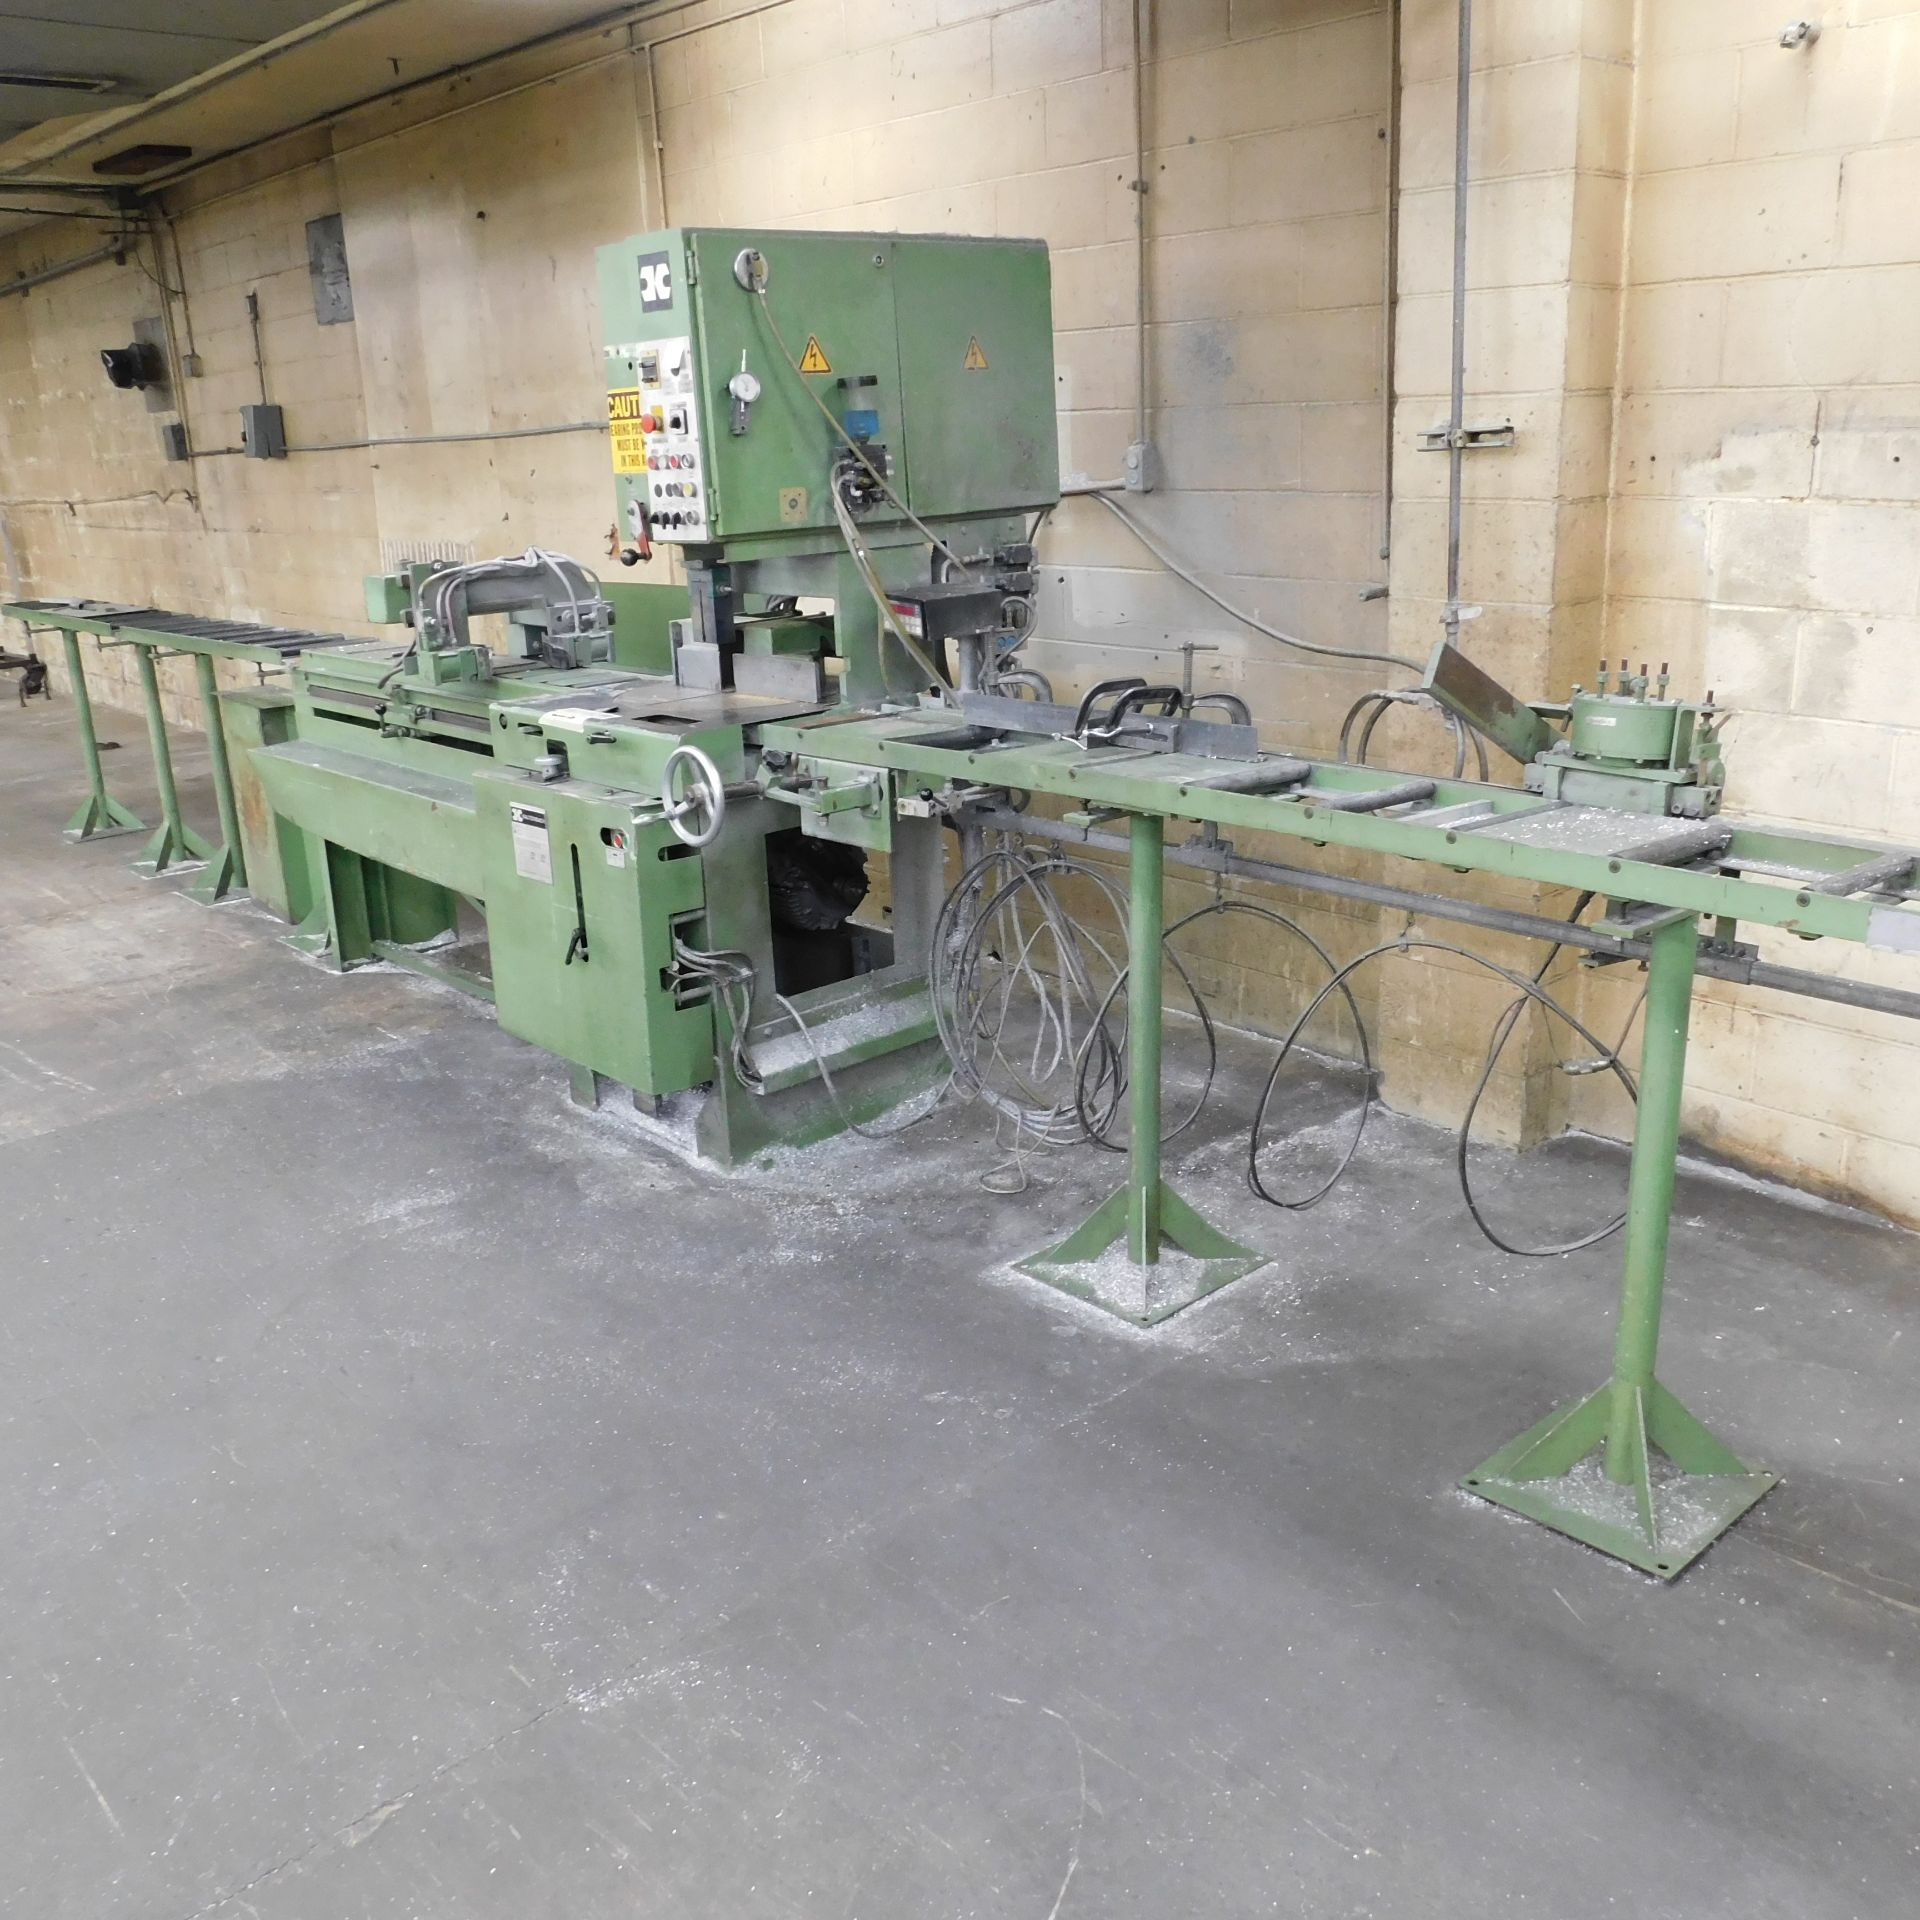 Kaltenbach Model SKL-400NA Fully Automatic Mitre Cutting Cold Saw, s/n 110542, 5.125" Round Solid